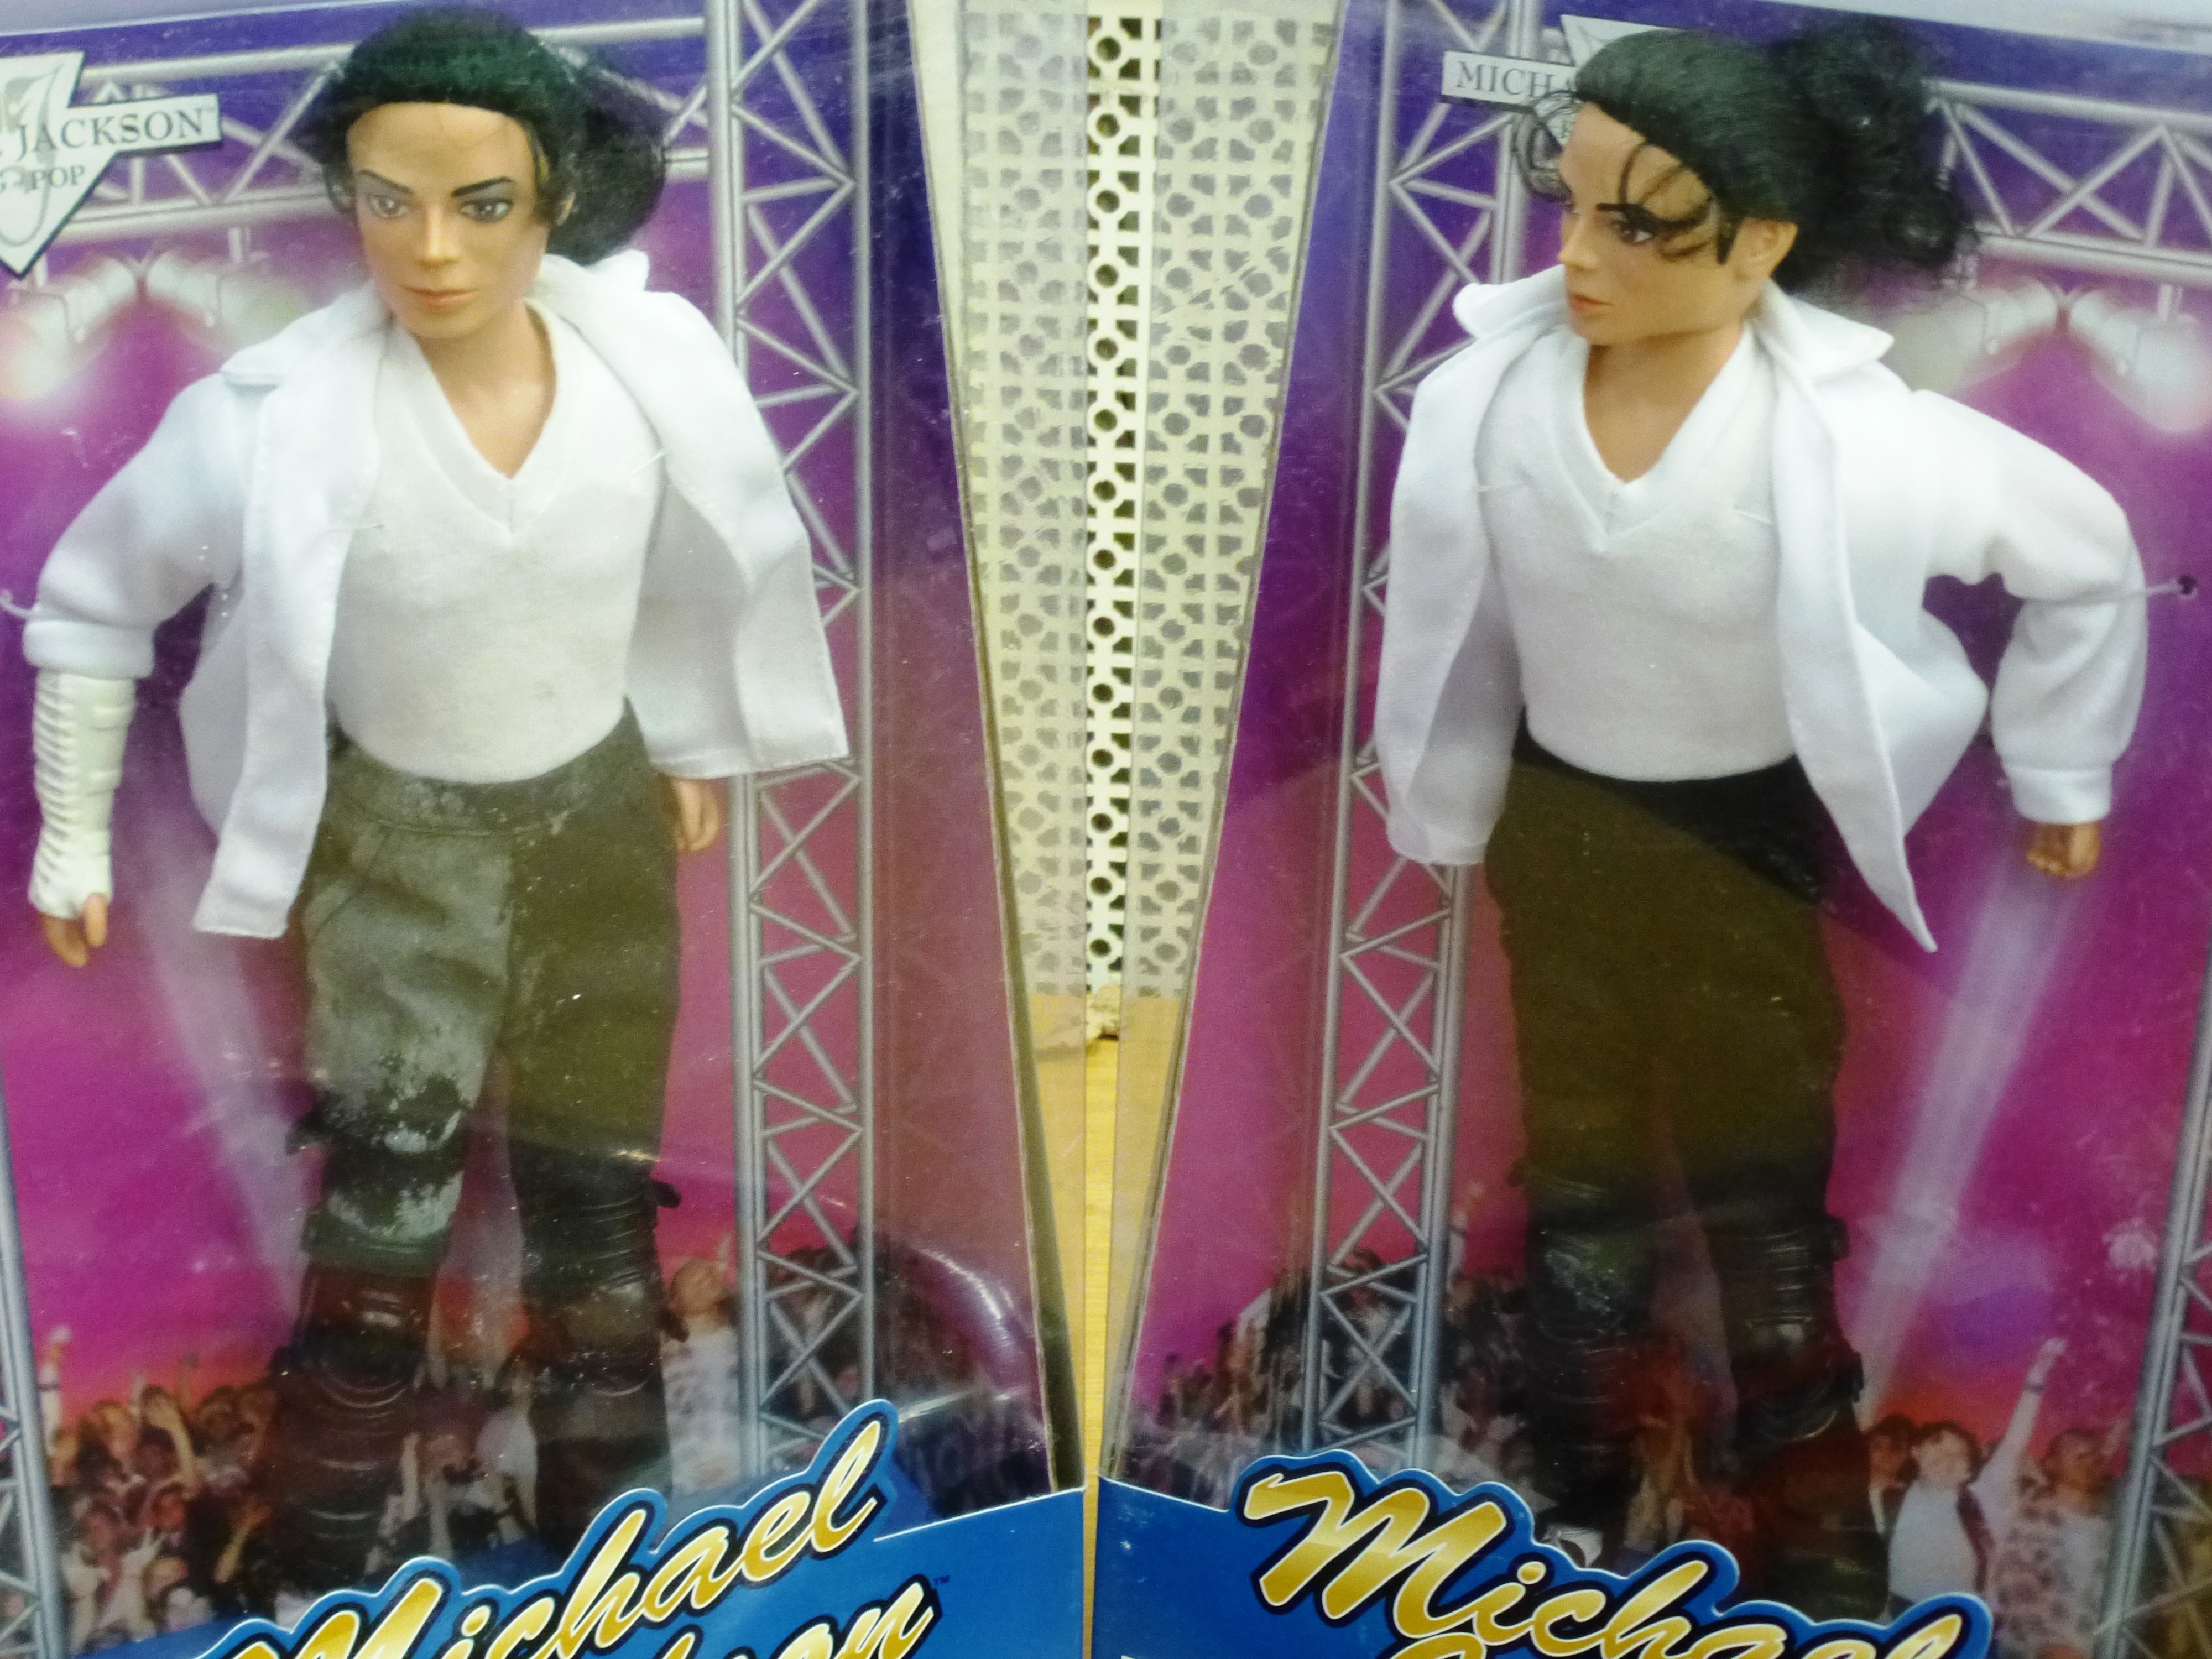 2 MICHAEL JACKSON DOLLS AND A MICHAEL JACKSON OUTFIT - Image 2 of 8